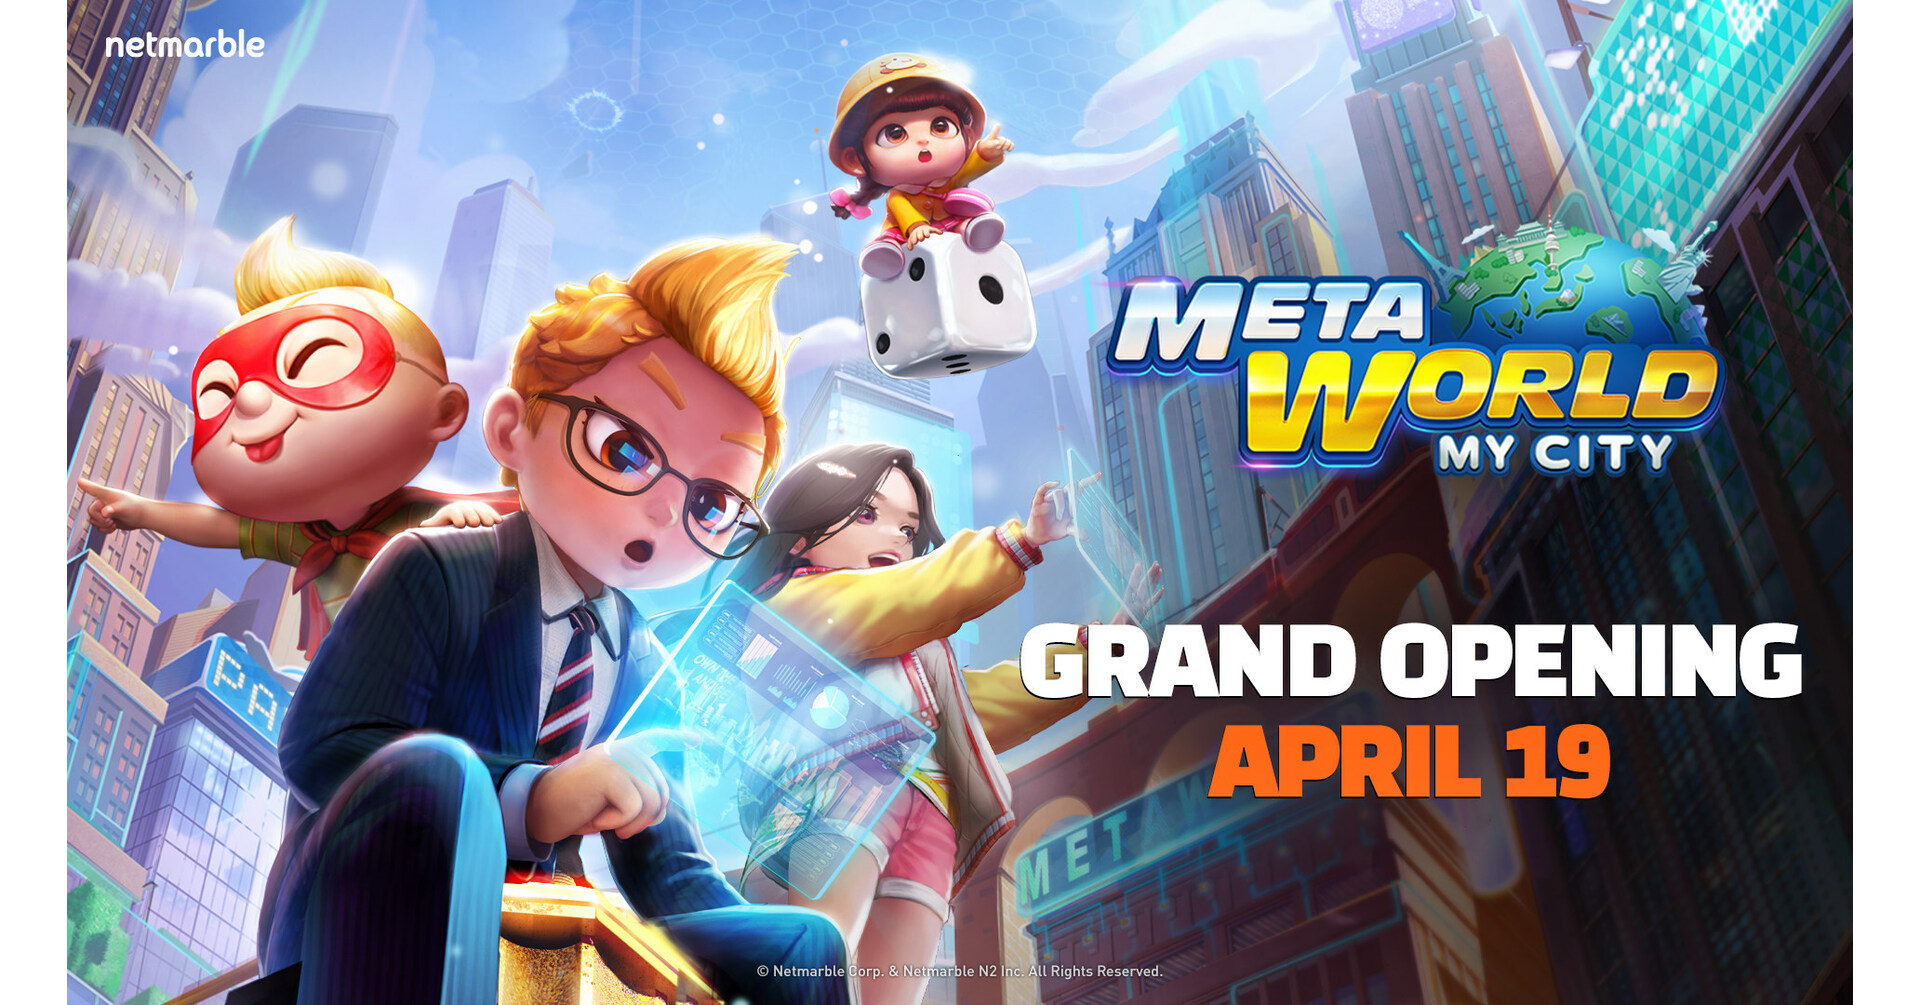 GET READY TO FIGHT ON-THE-GO WITH THE GLOBAL LAUNCH OF NETMARBLE'S